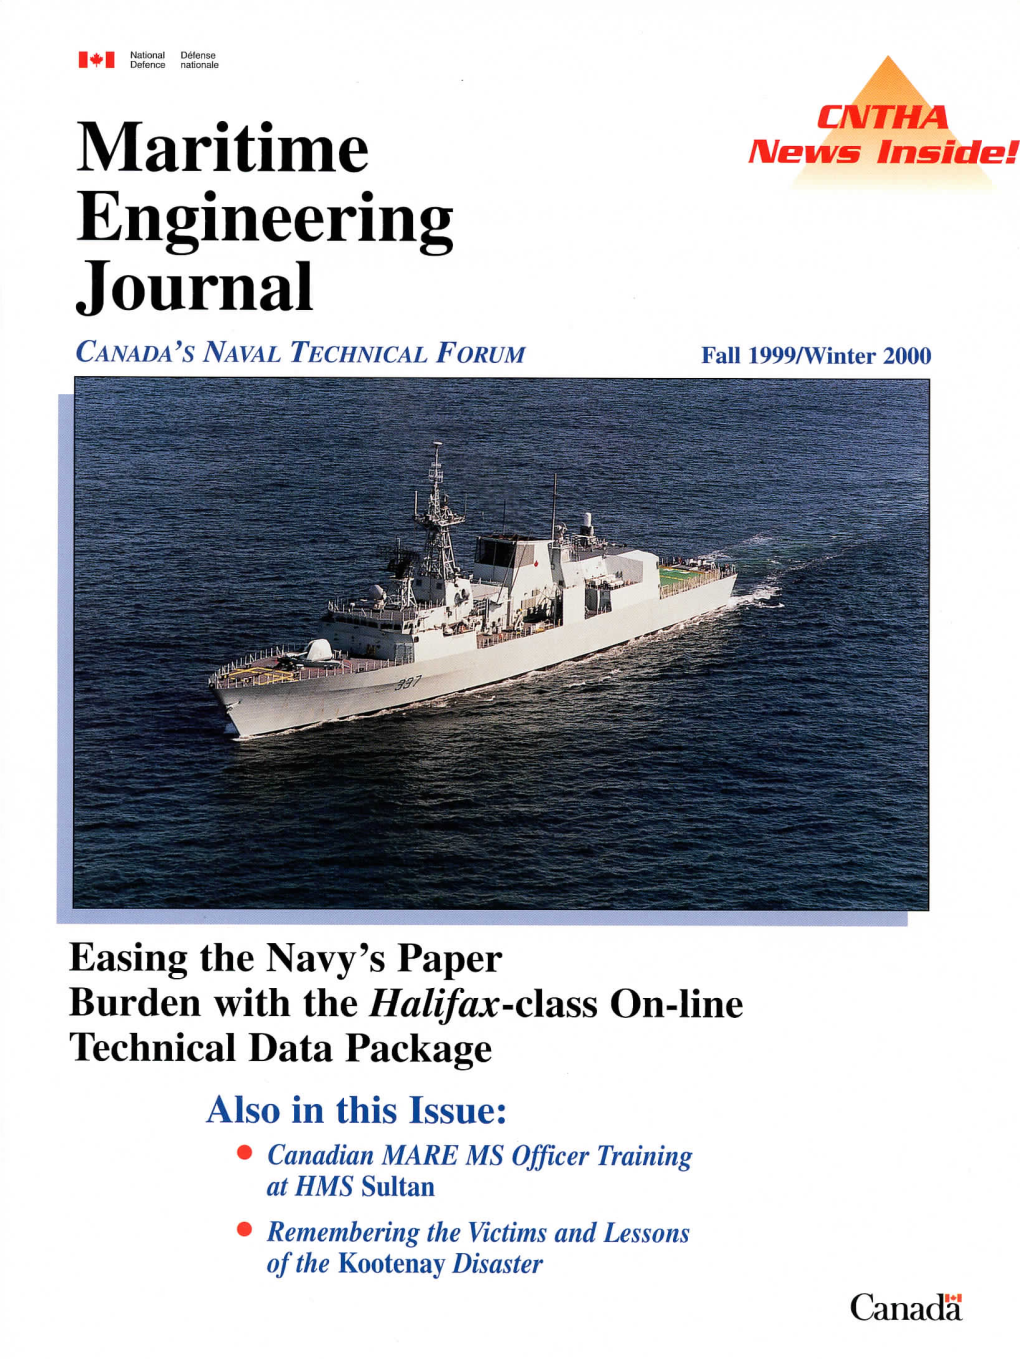 Maritime Engineering Journal (ISSN 0713-0058) Is an Unofficial Publication of the Maritime Engineers of Mme